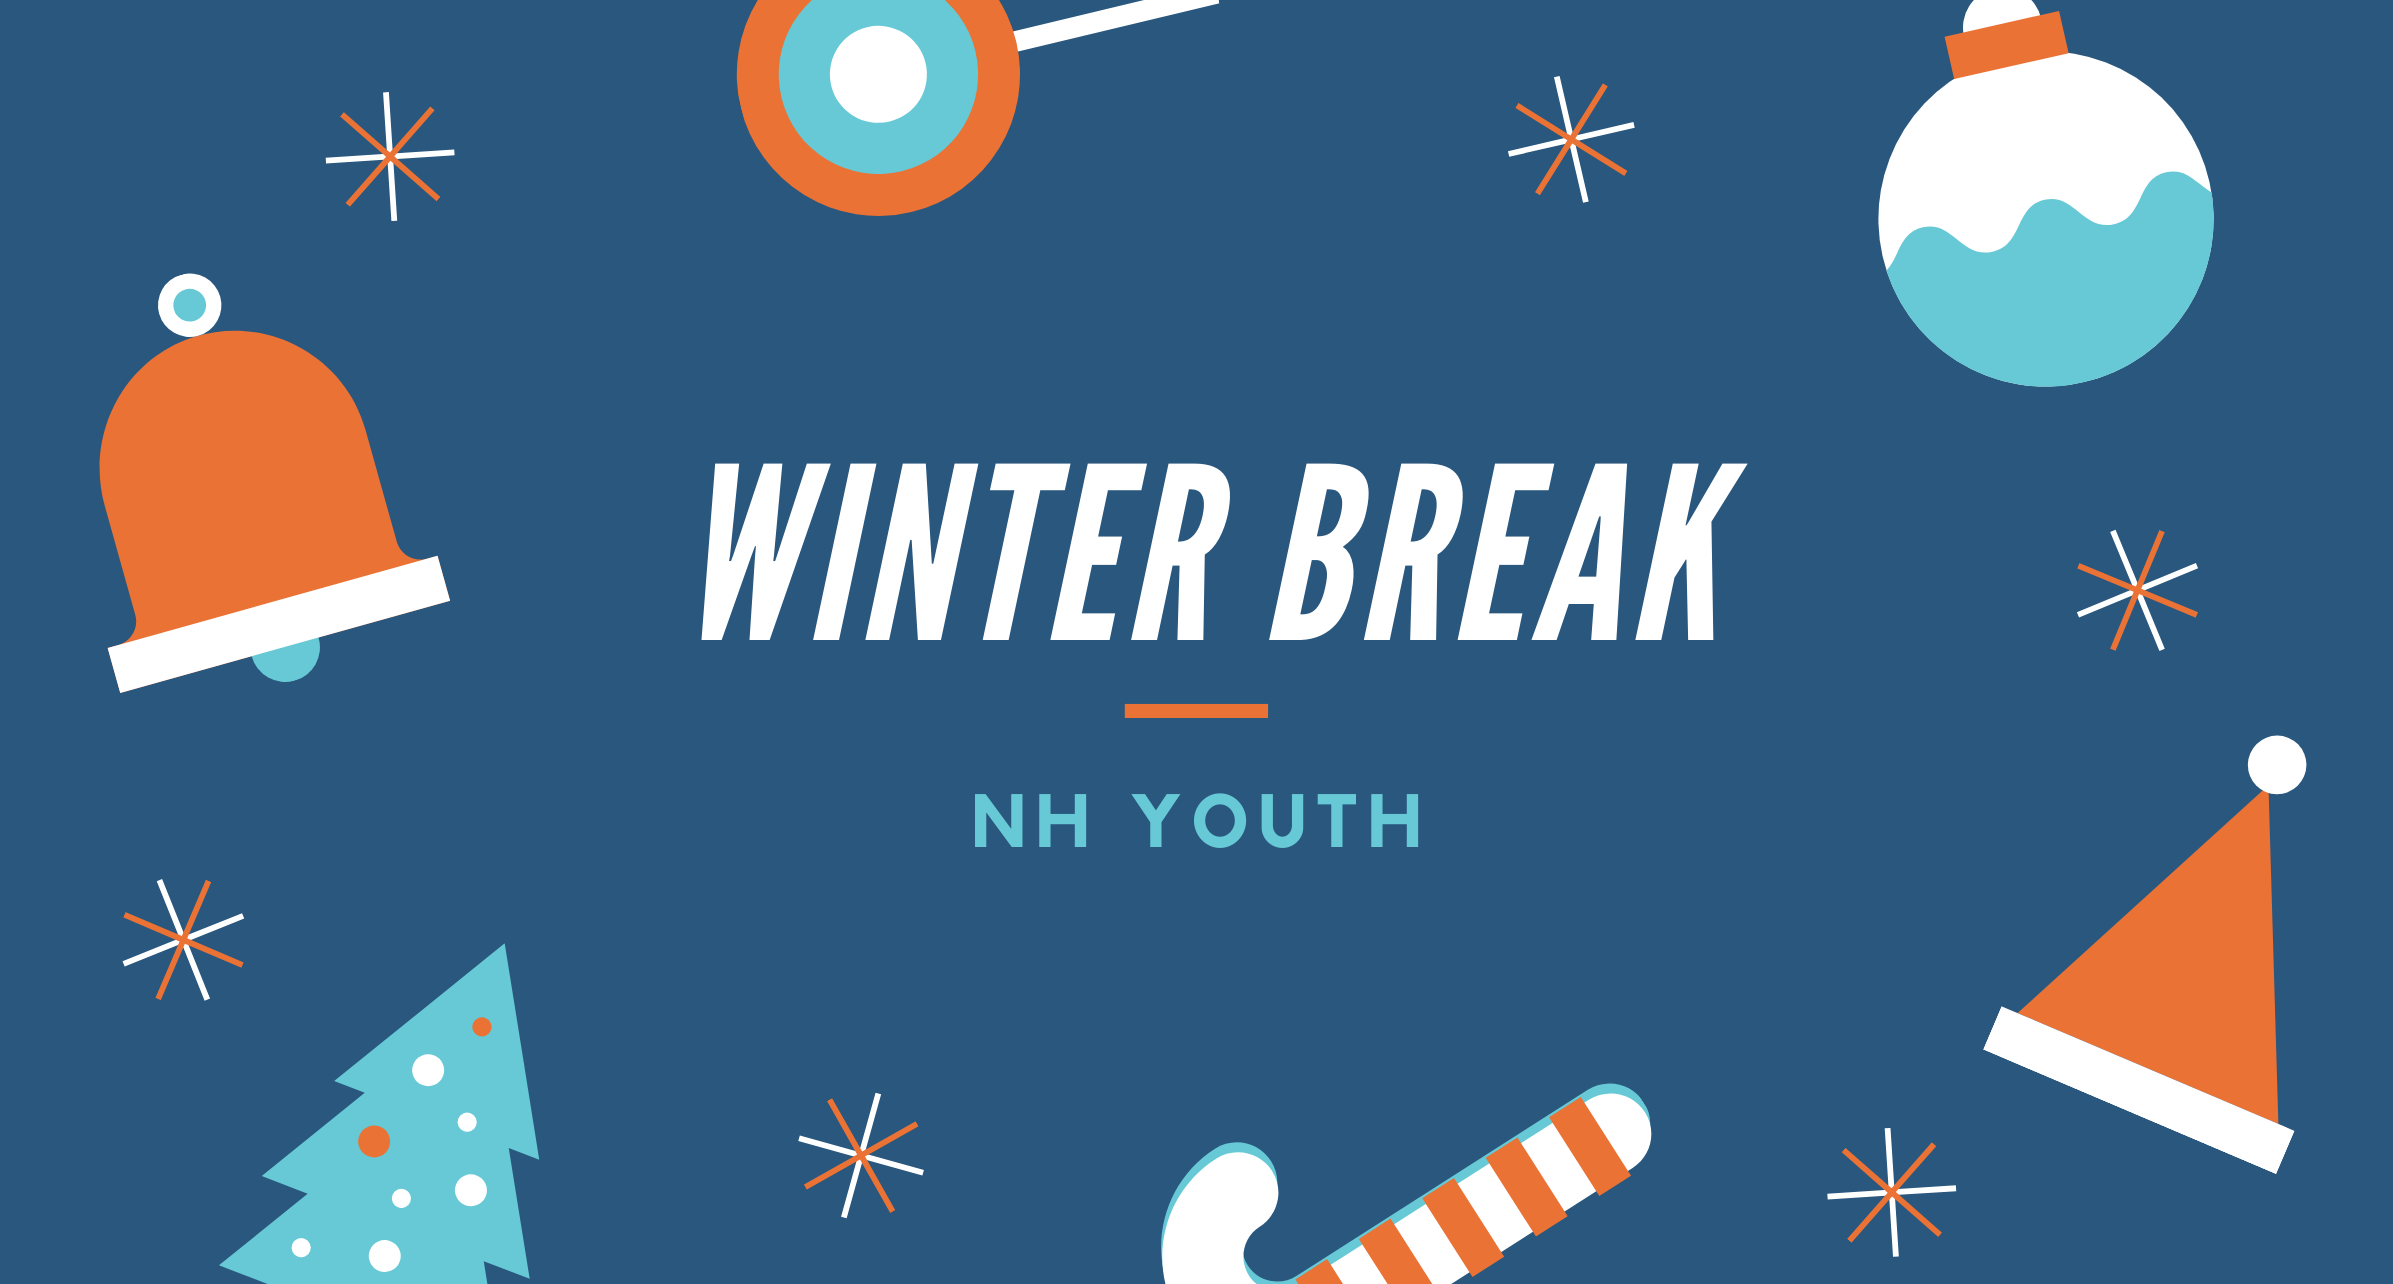 nh youth winter